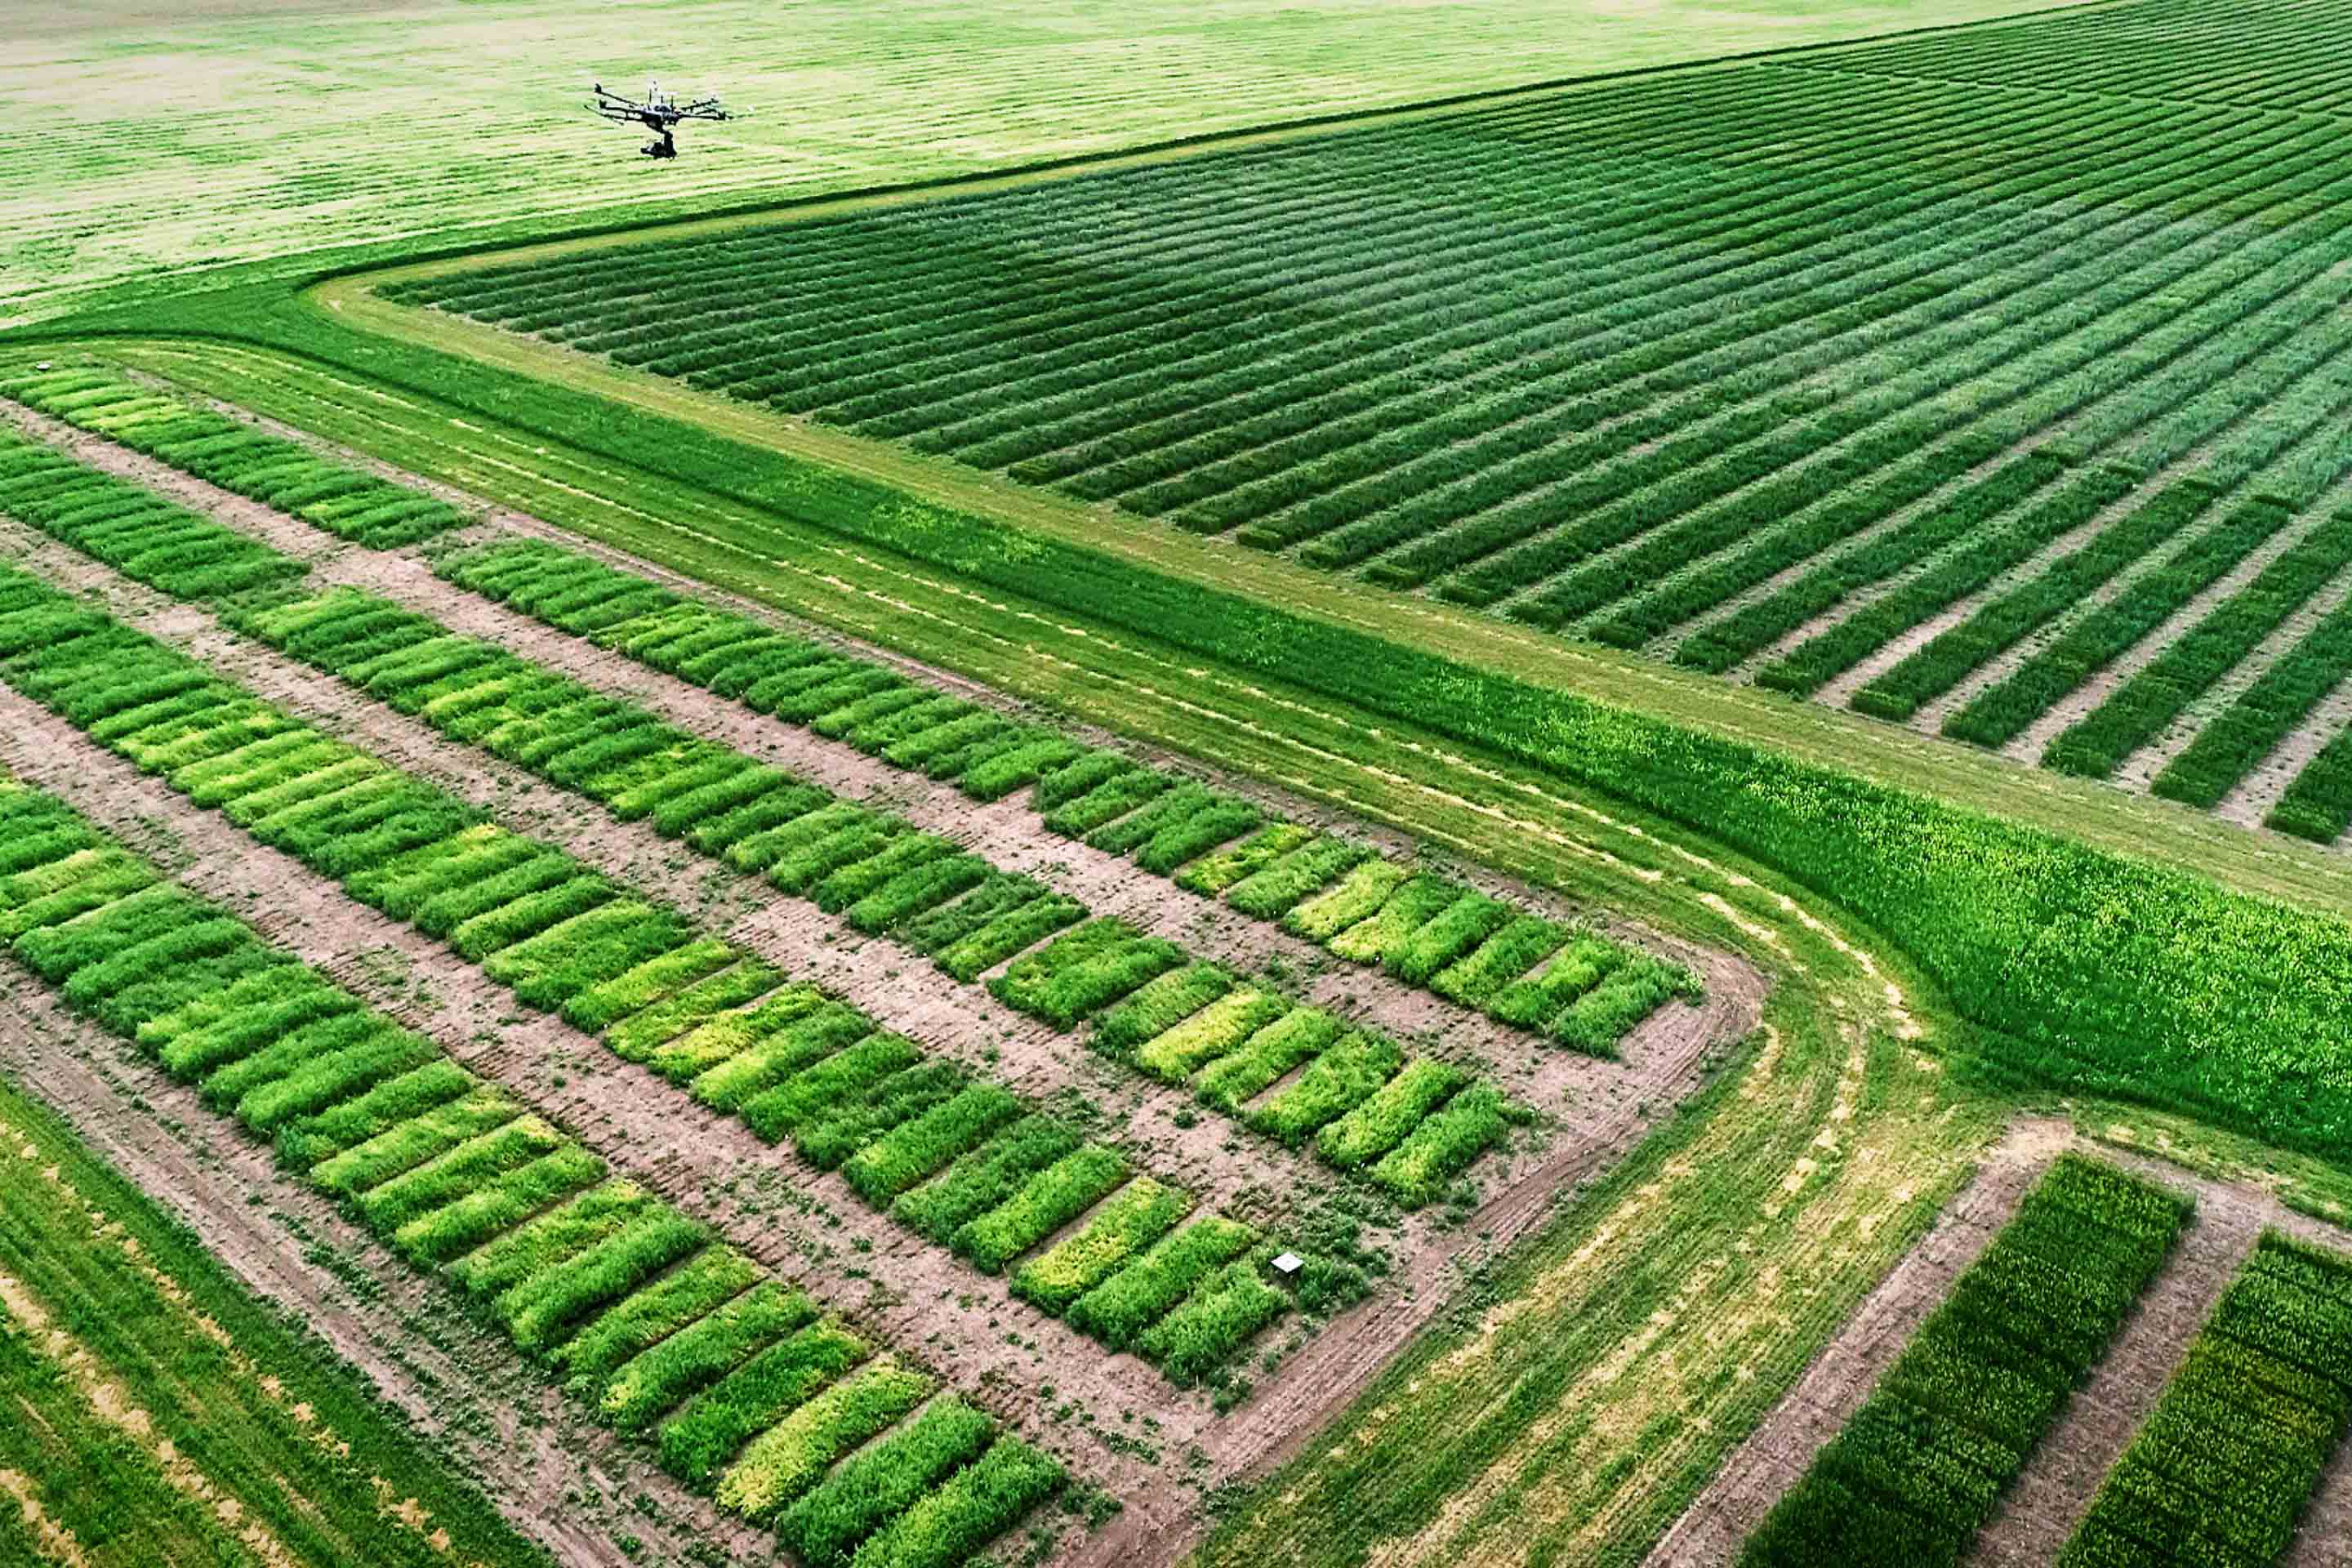 A drone above USask’s Kernen Crop Research Farm, Summer 2019. (Photo: Steve Ryu, Images of Research 2020)